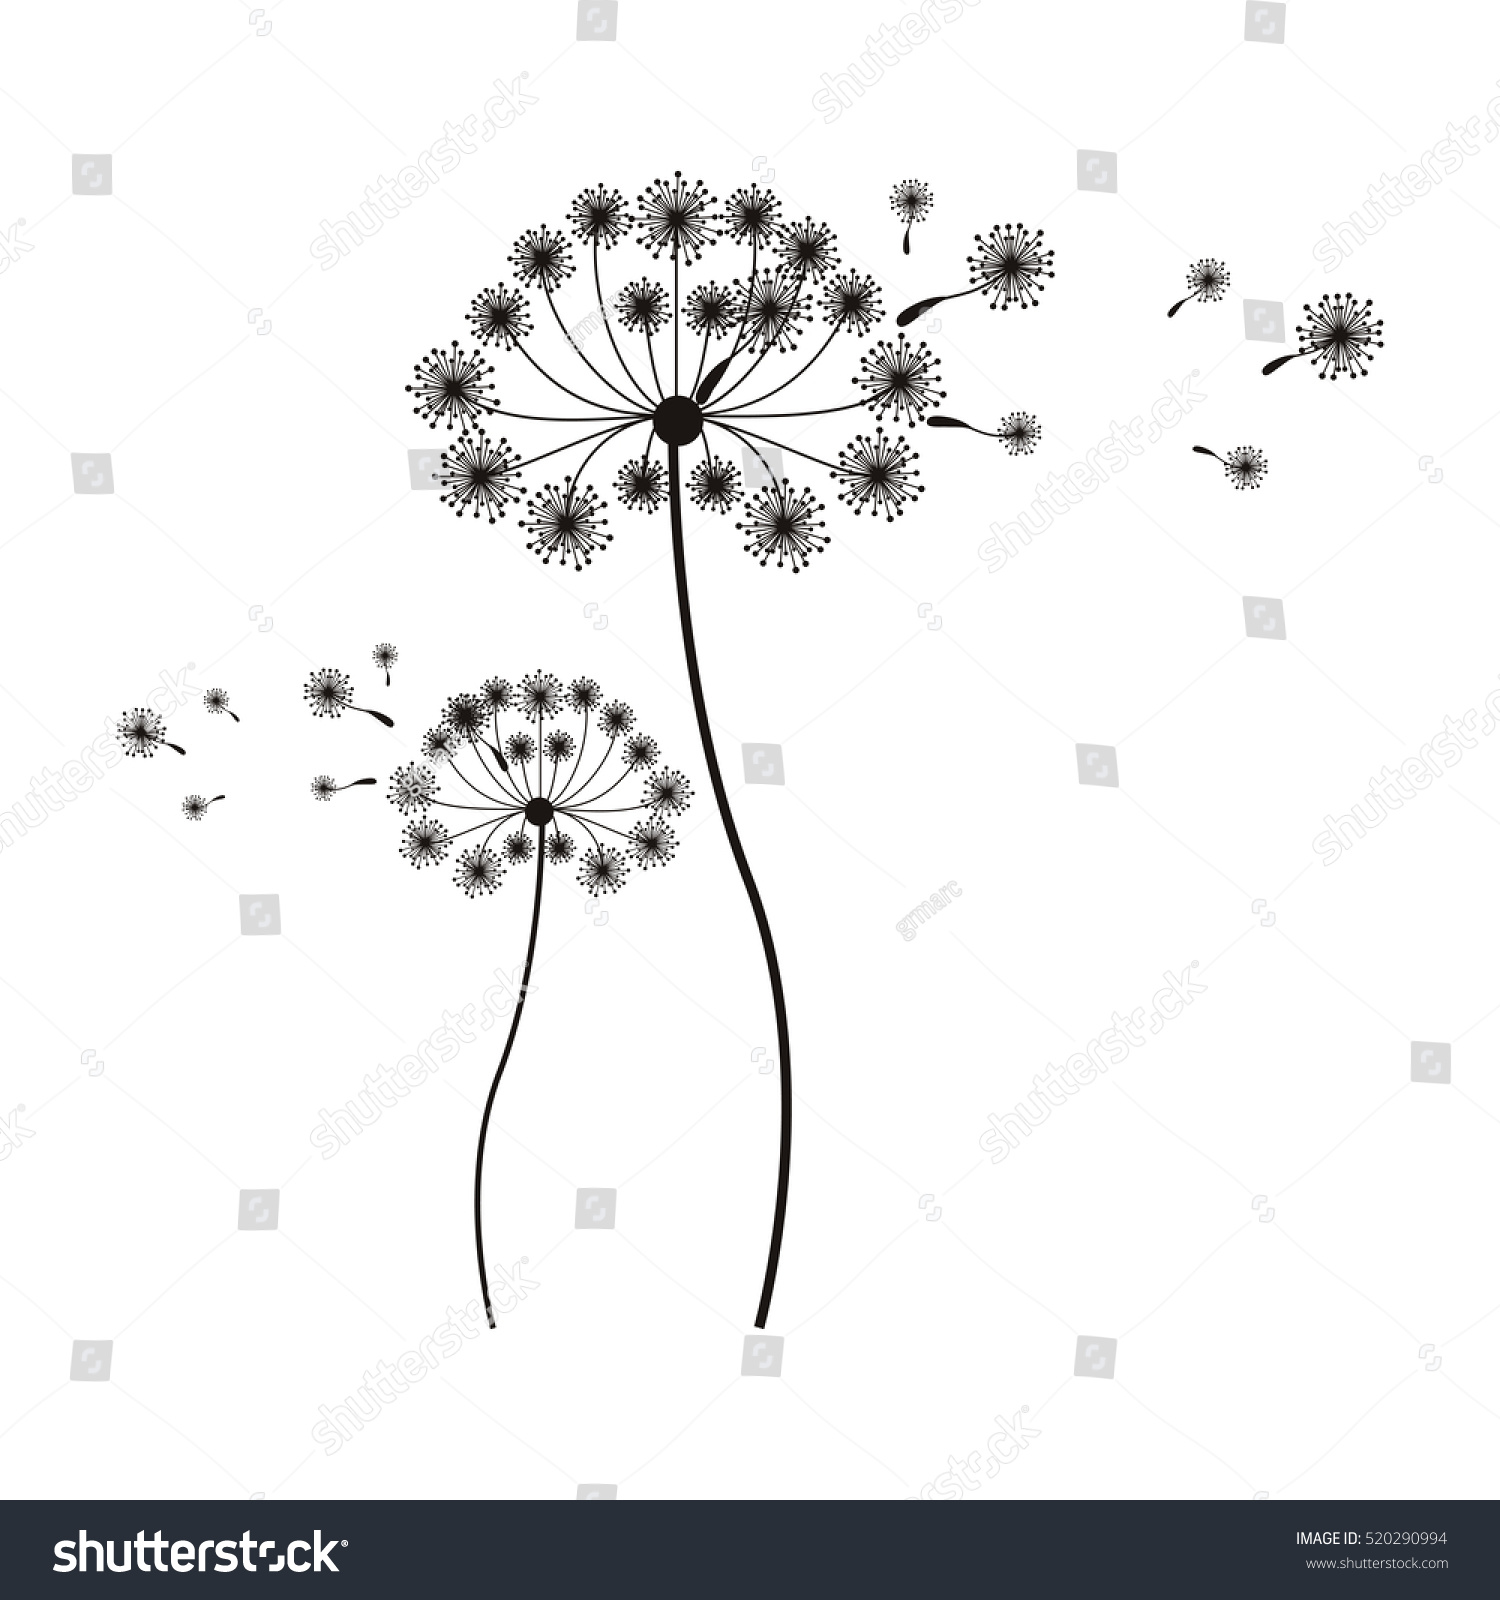 Silhouette Flying Blow Dandelion Buds Stock Photo (Photo, Vector ...